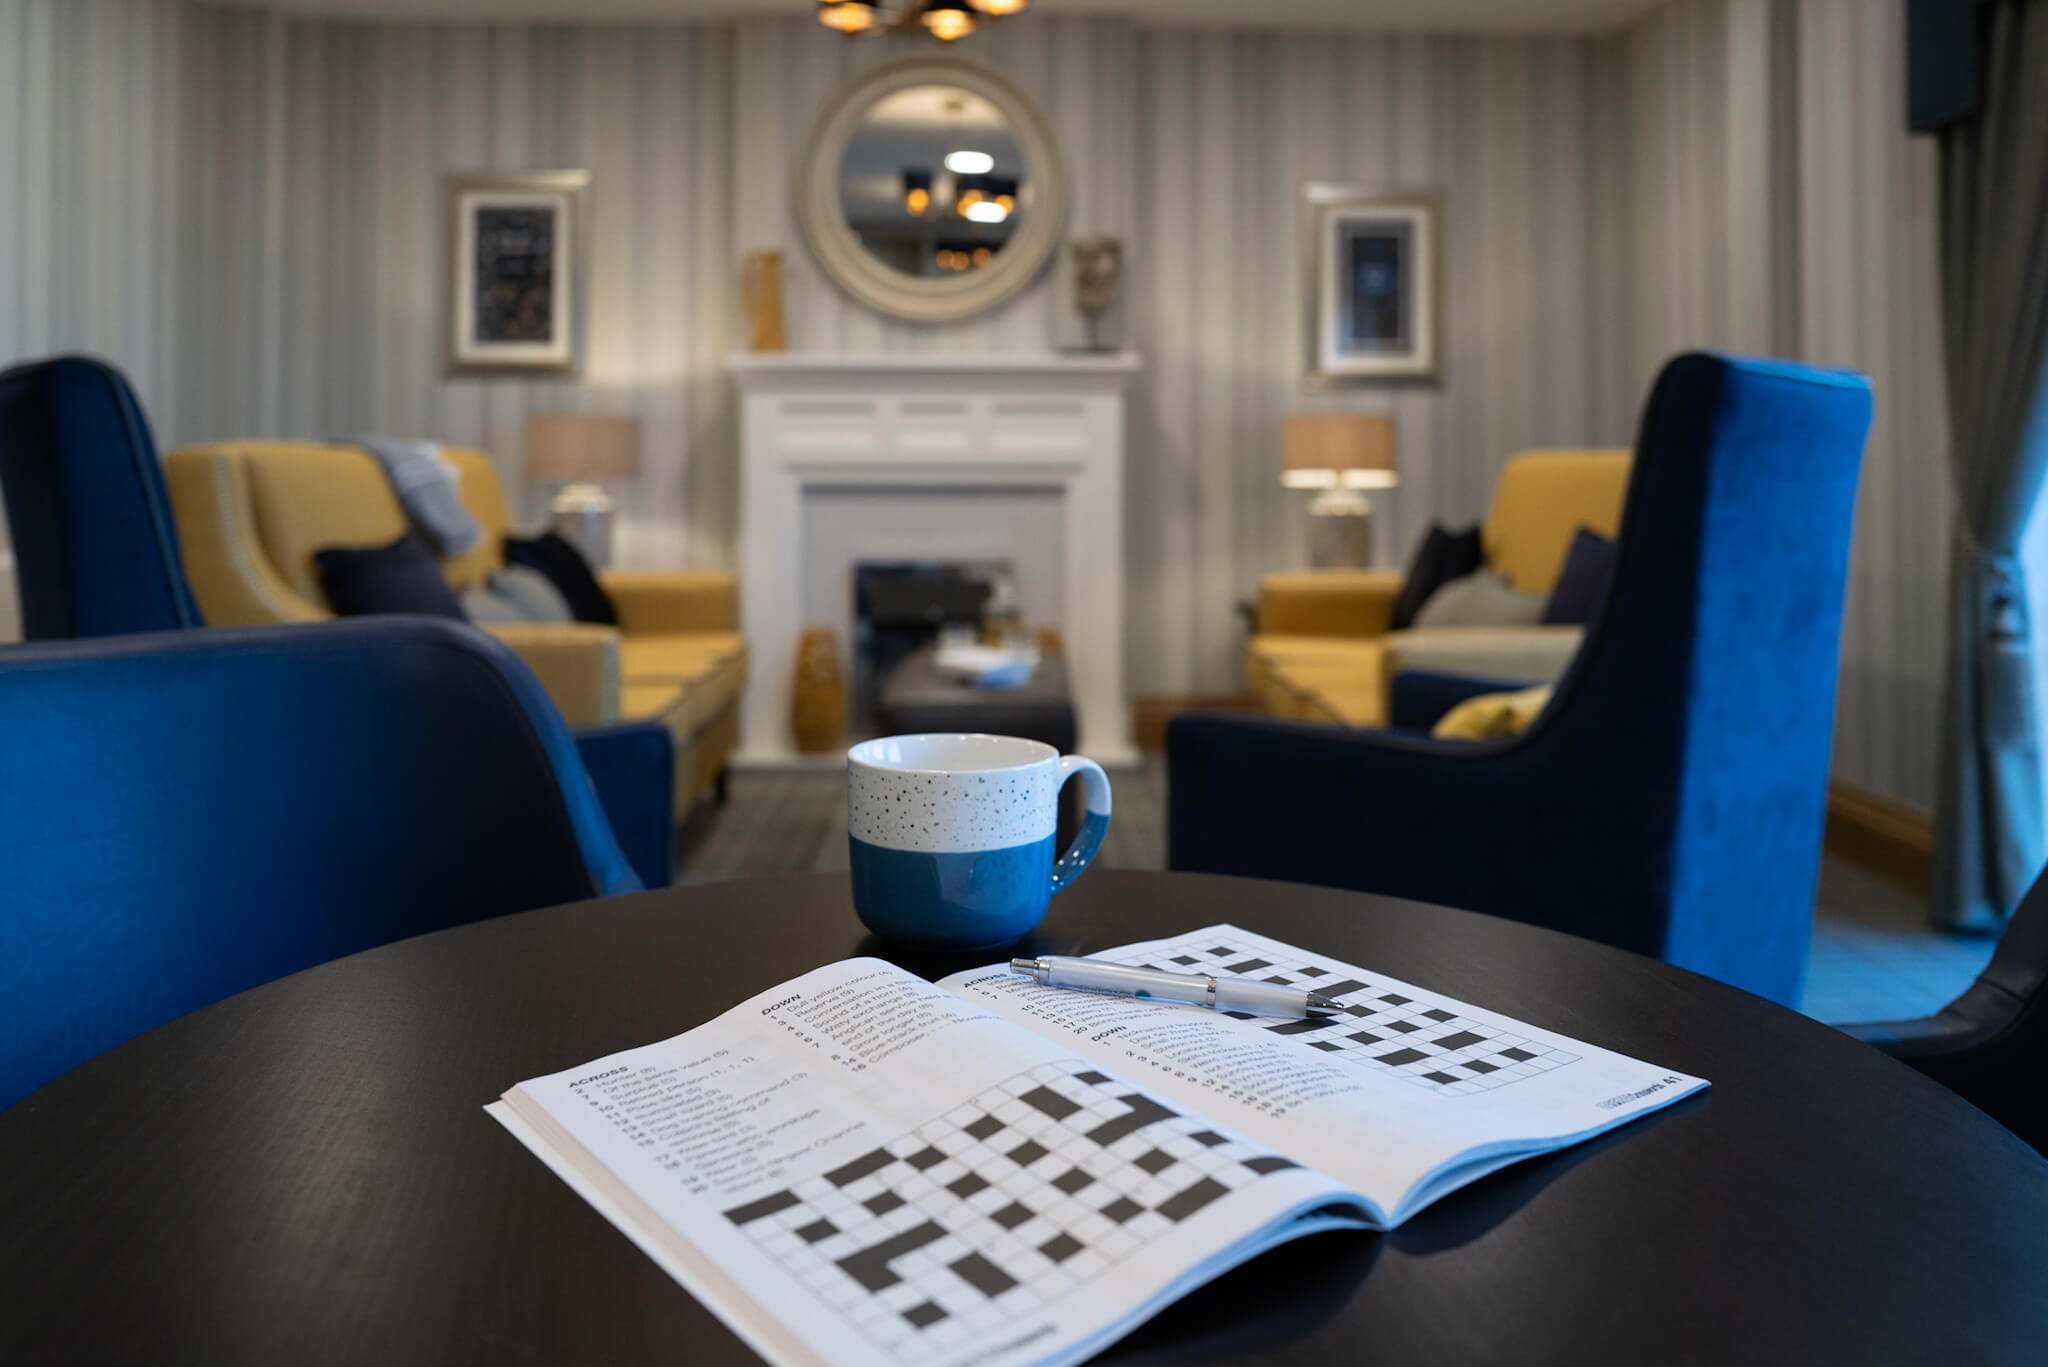 Crossword puzzle on a black table with blue mug. Blurred background of a lounge with fireplace, circle mirror, mustard sofas and navy blue armchairs.